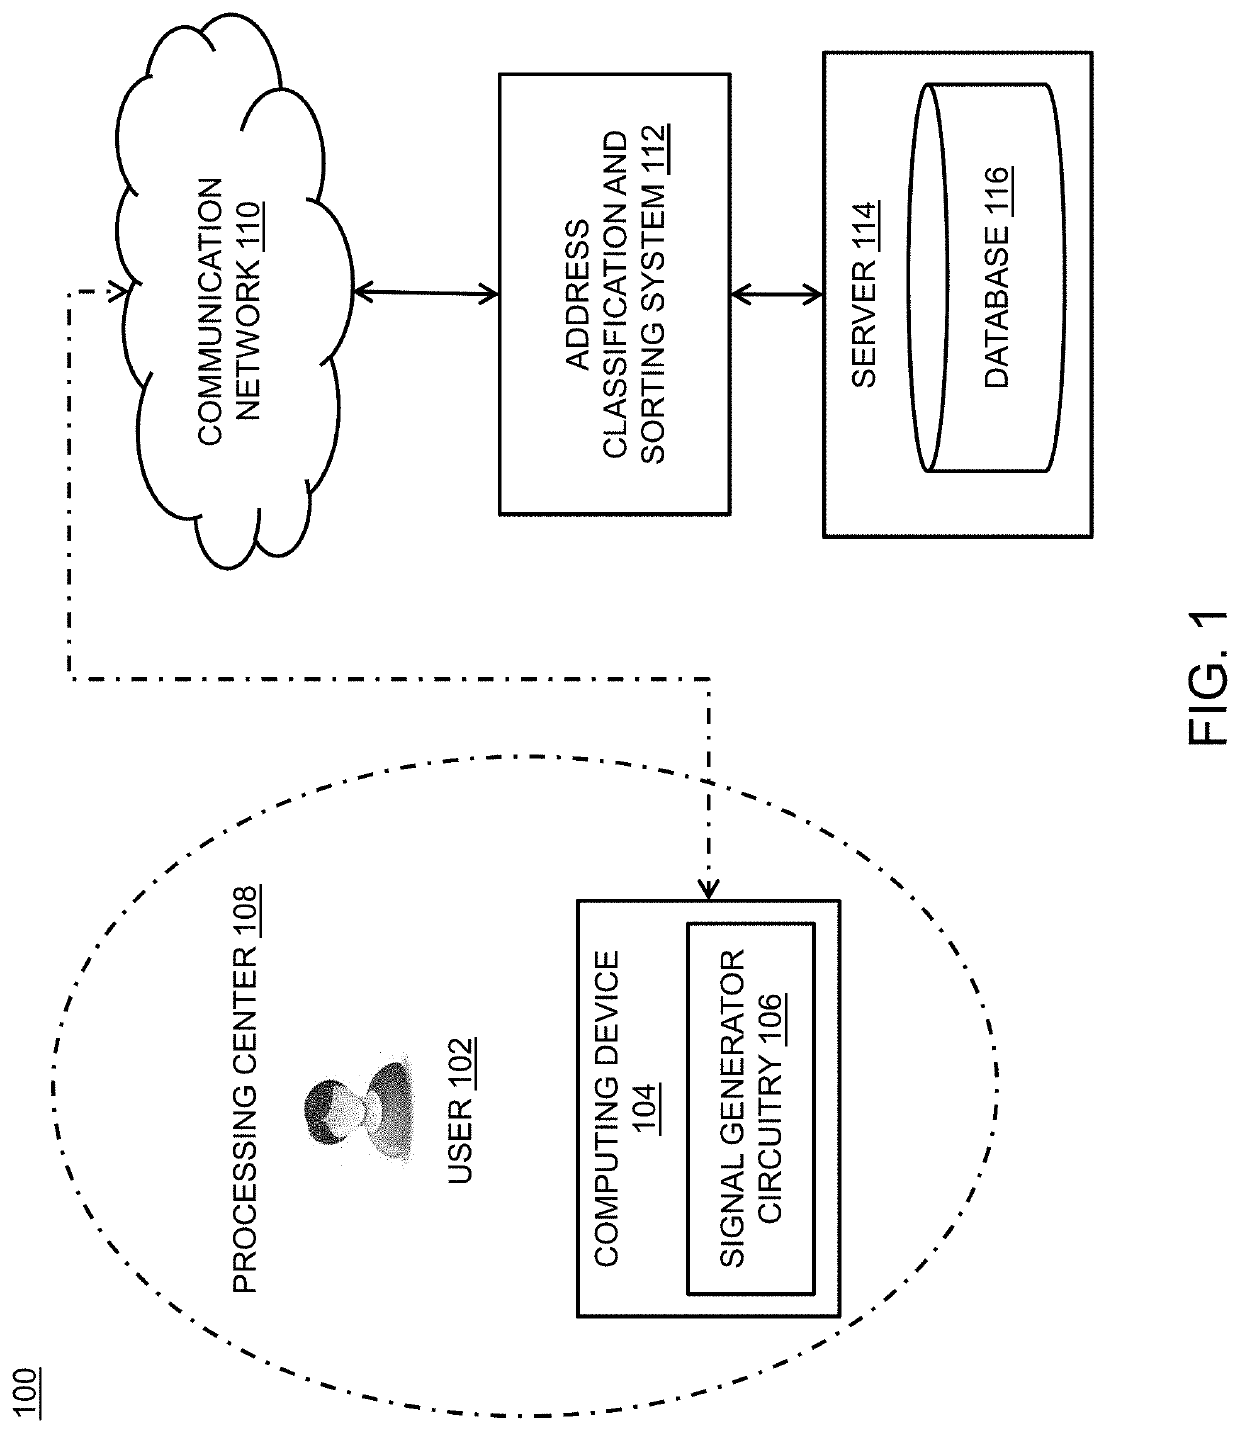 Method and system for smart address classification